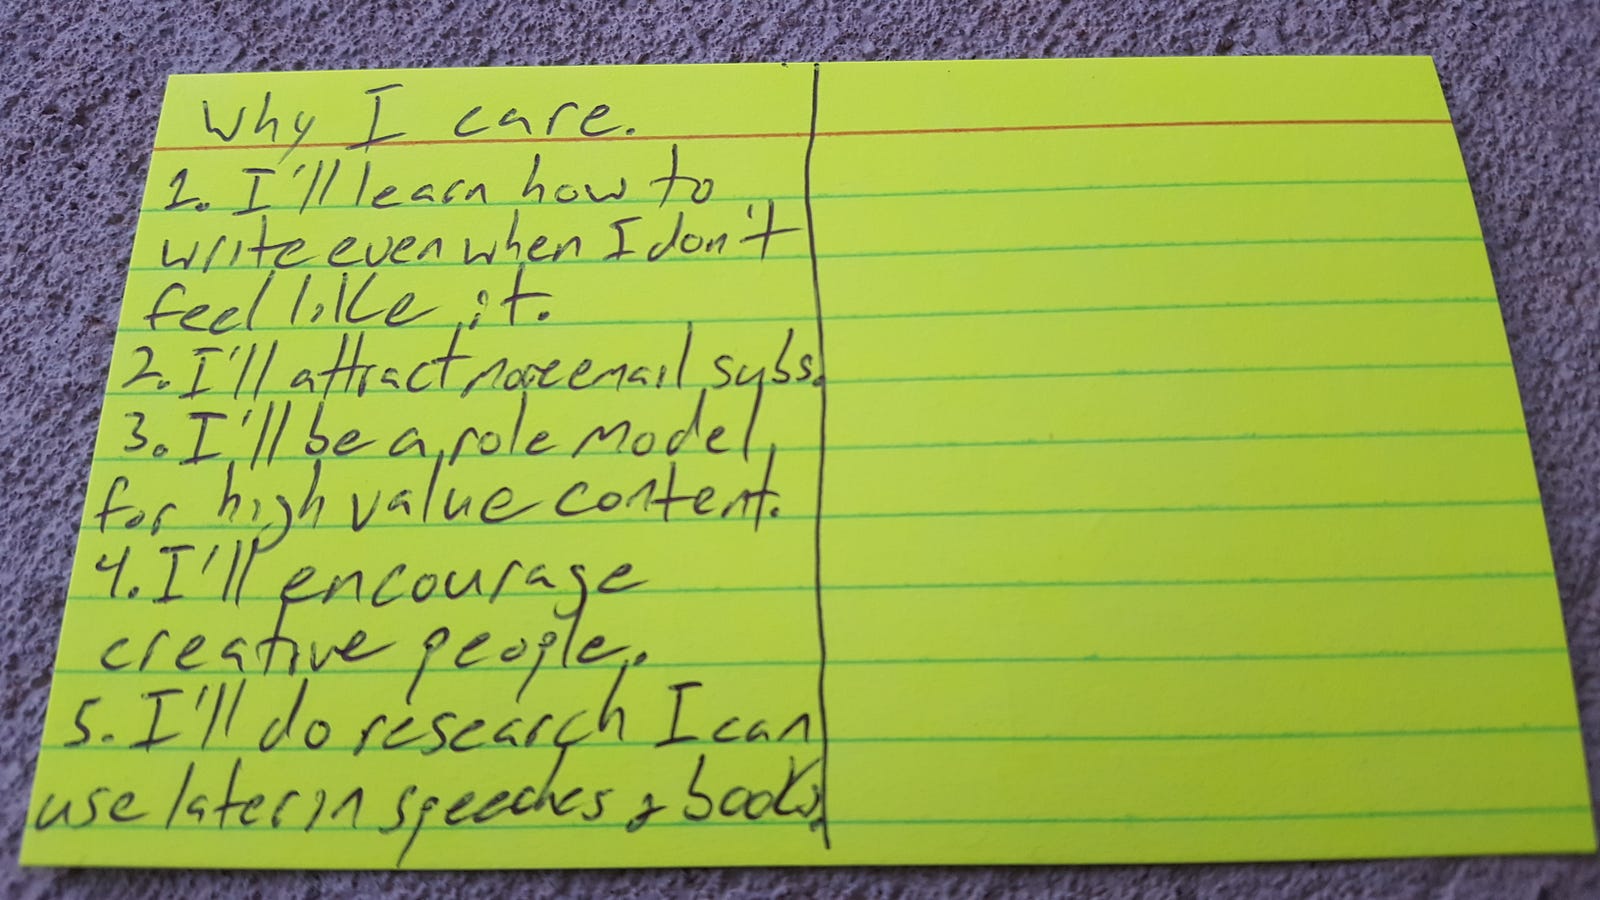 Notecard with 5 reasons written beneath the heading "Why I care."